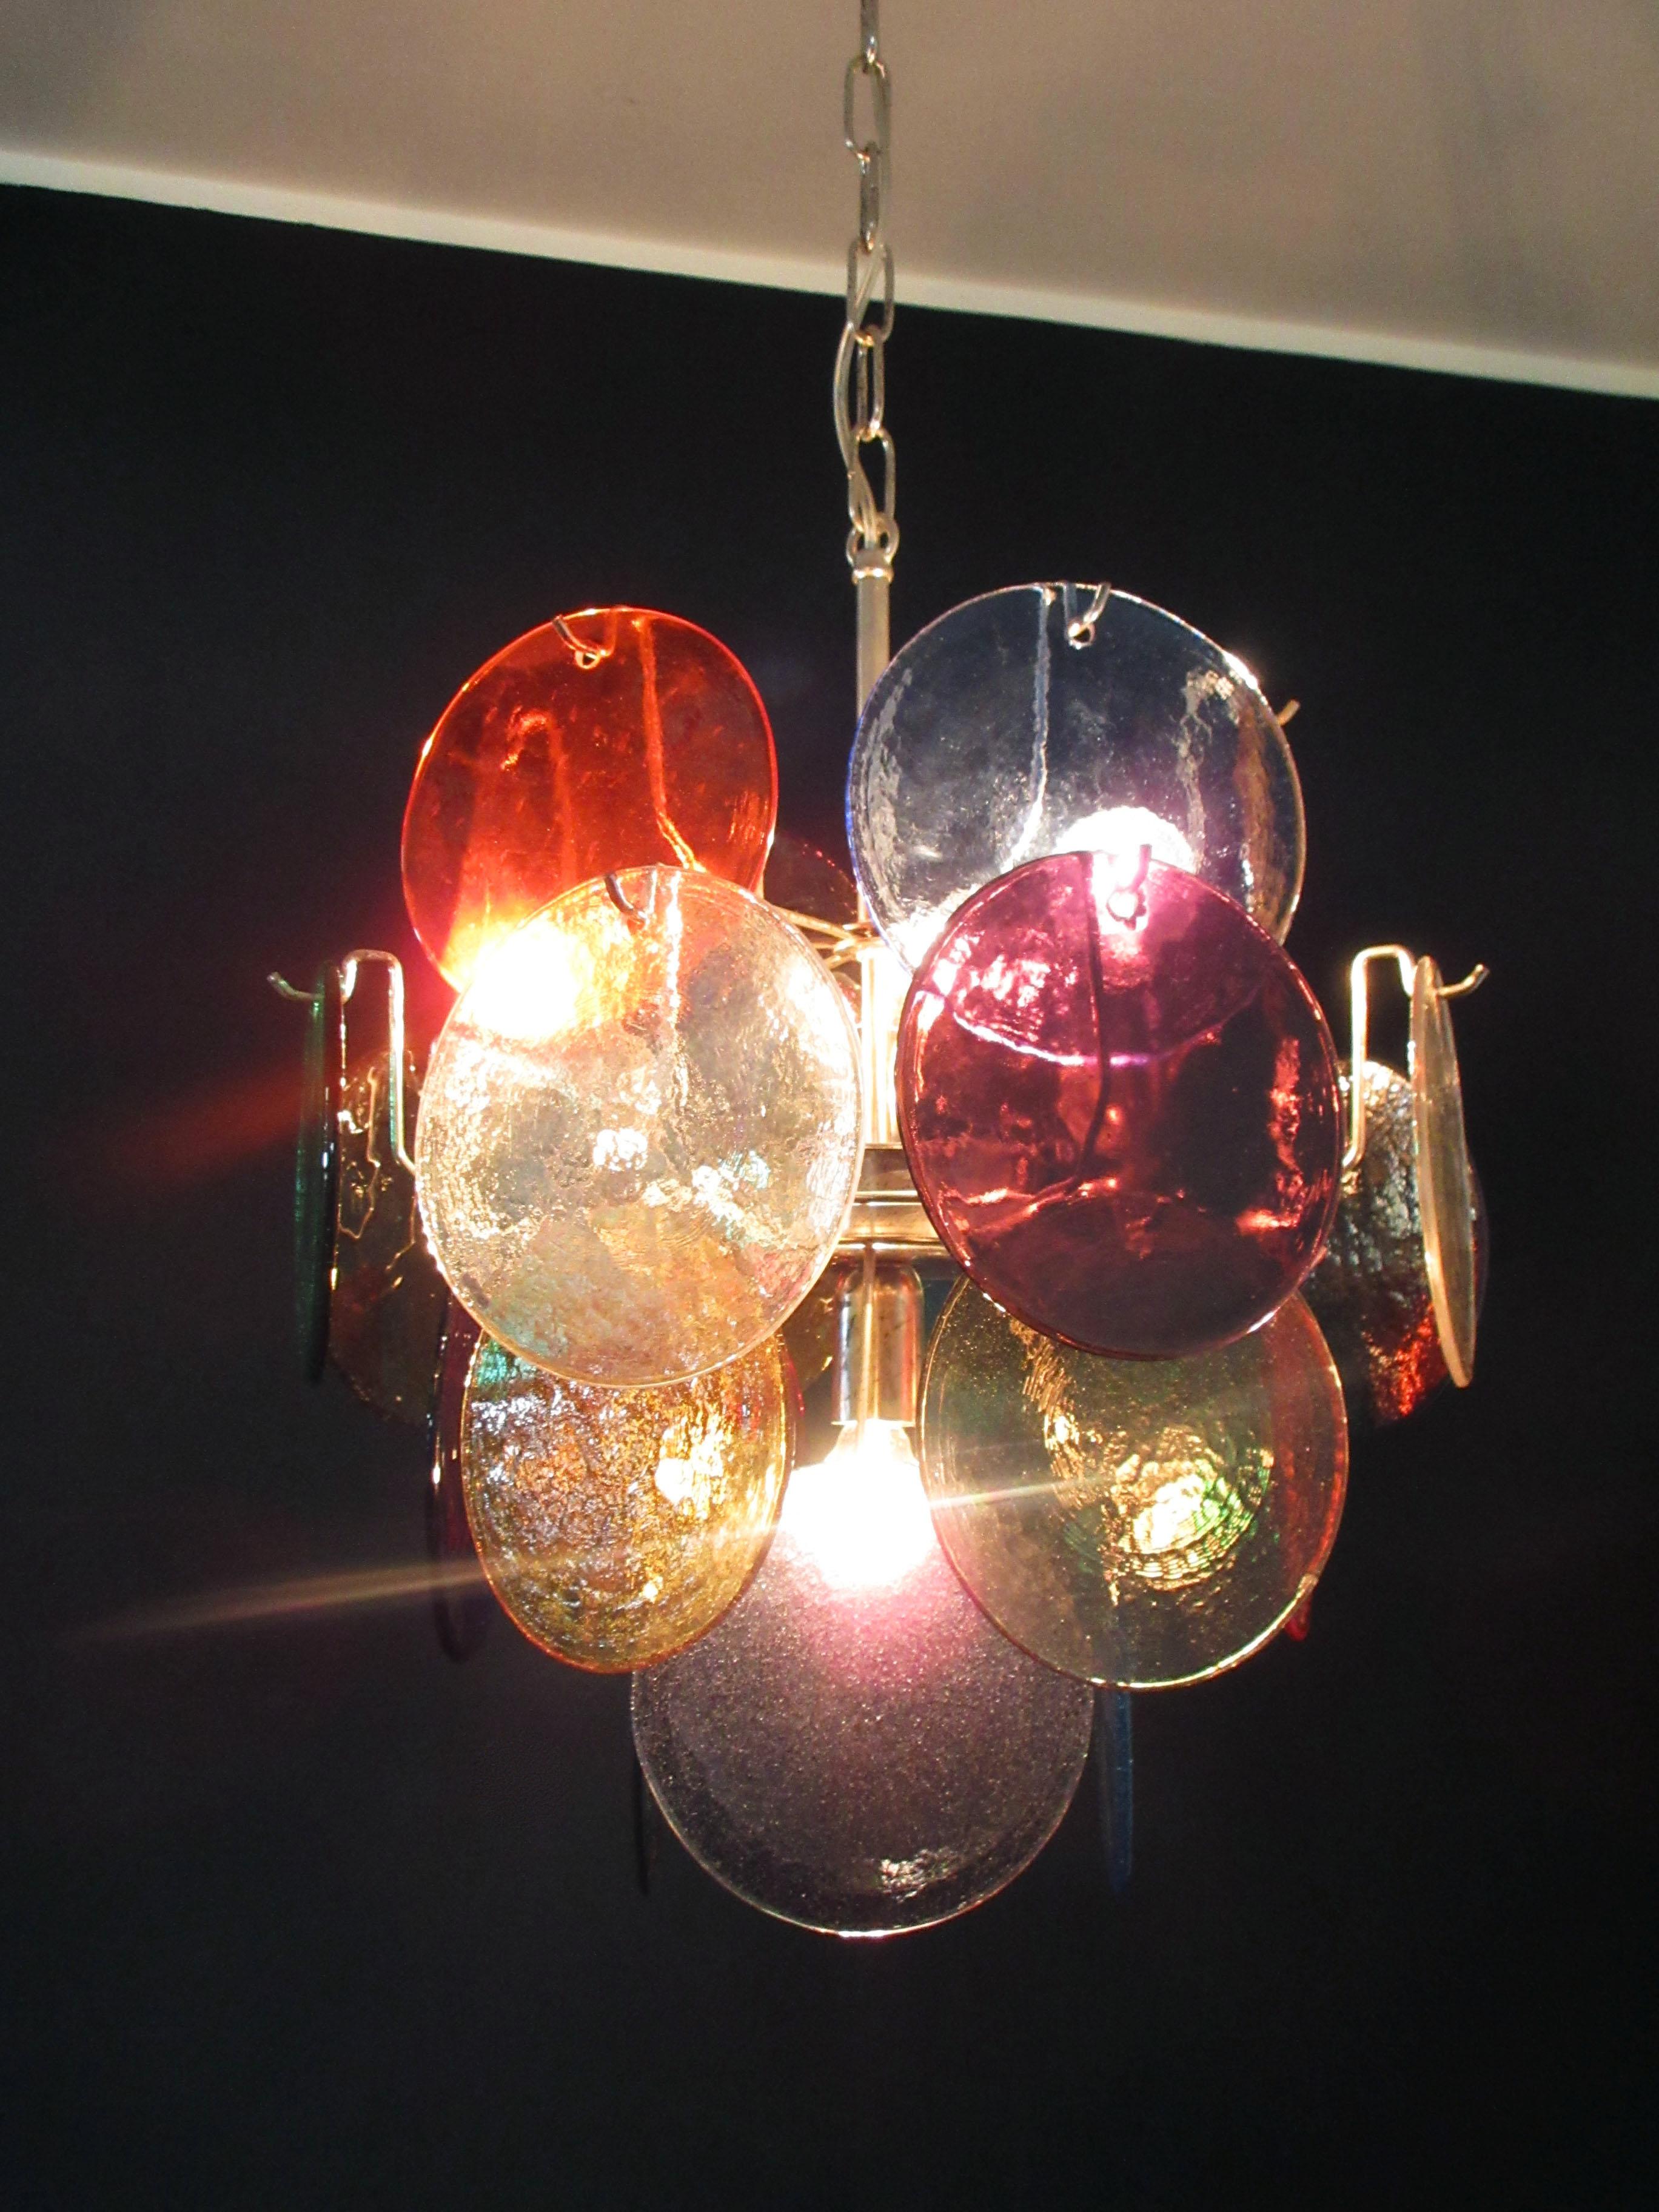 Vintage Italian Murano chandelier in Vistosi style. The chandelier has 24 fantastic Murano multicolored disks in a metal frame.
Period: late 20th century
Dimensions: 41,30 inches (105 cm) height with chain; 20,50 inches (52 cm) height without